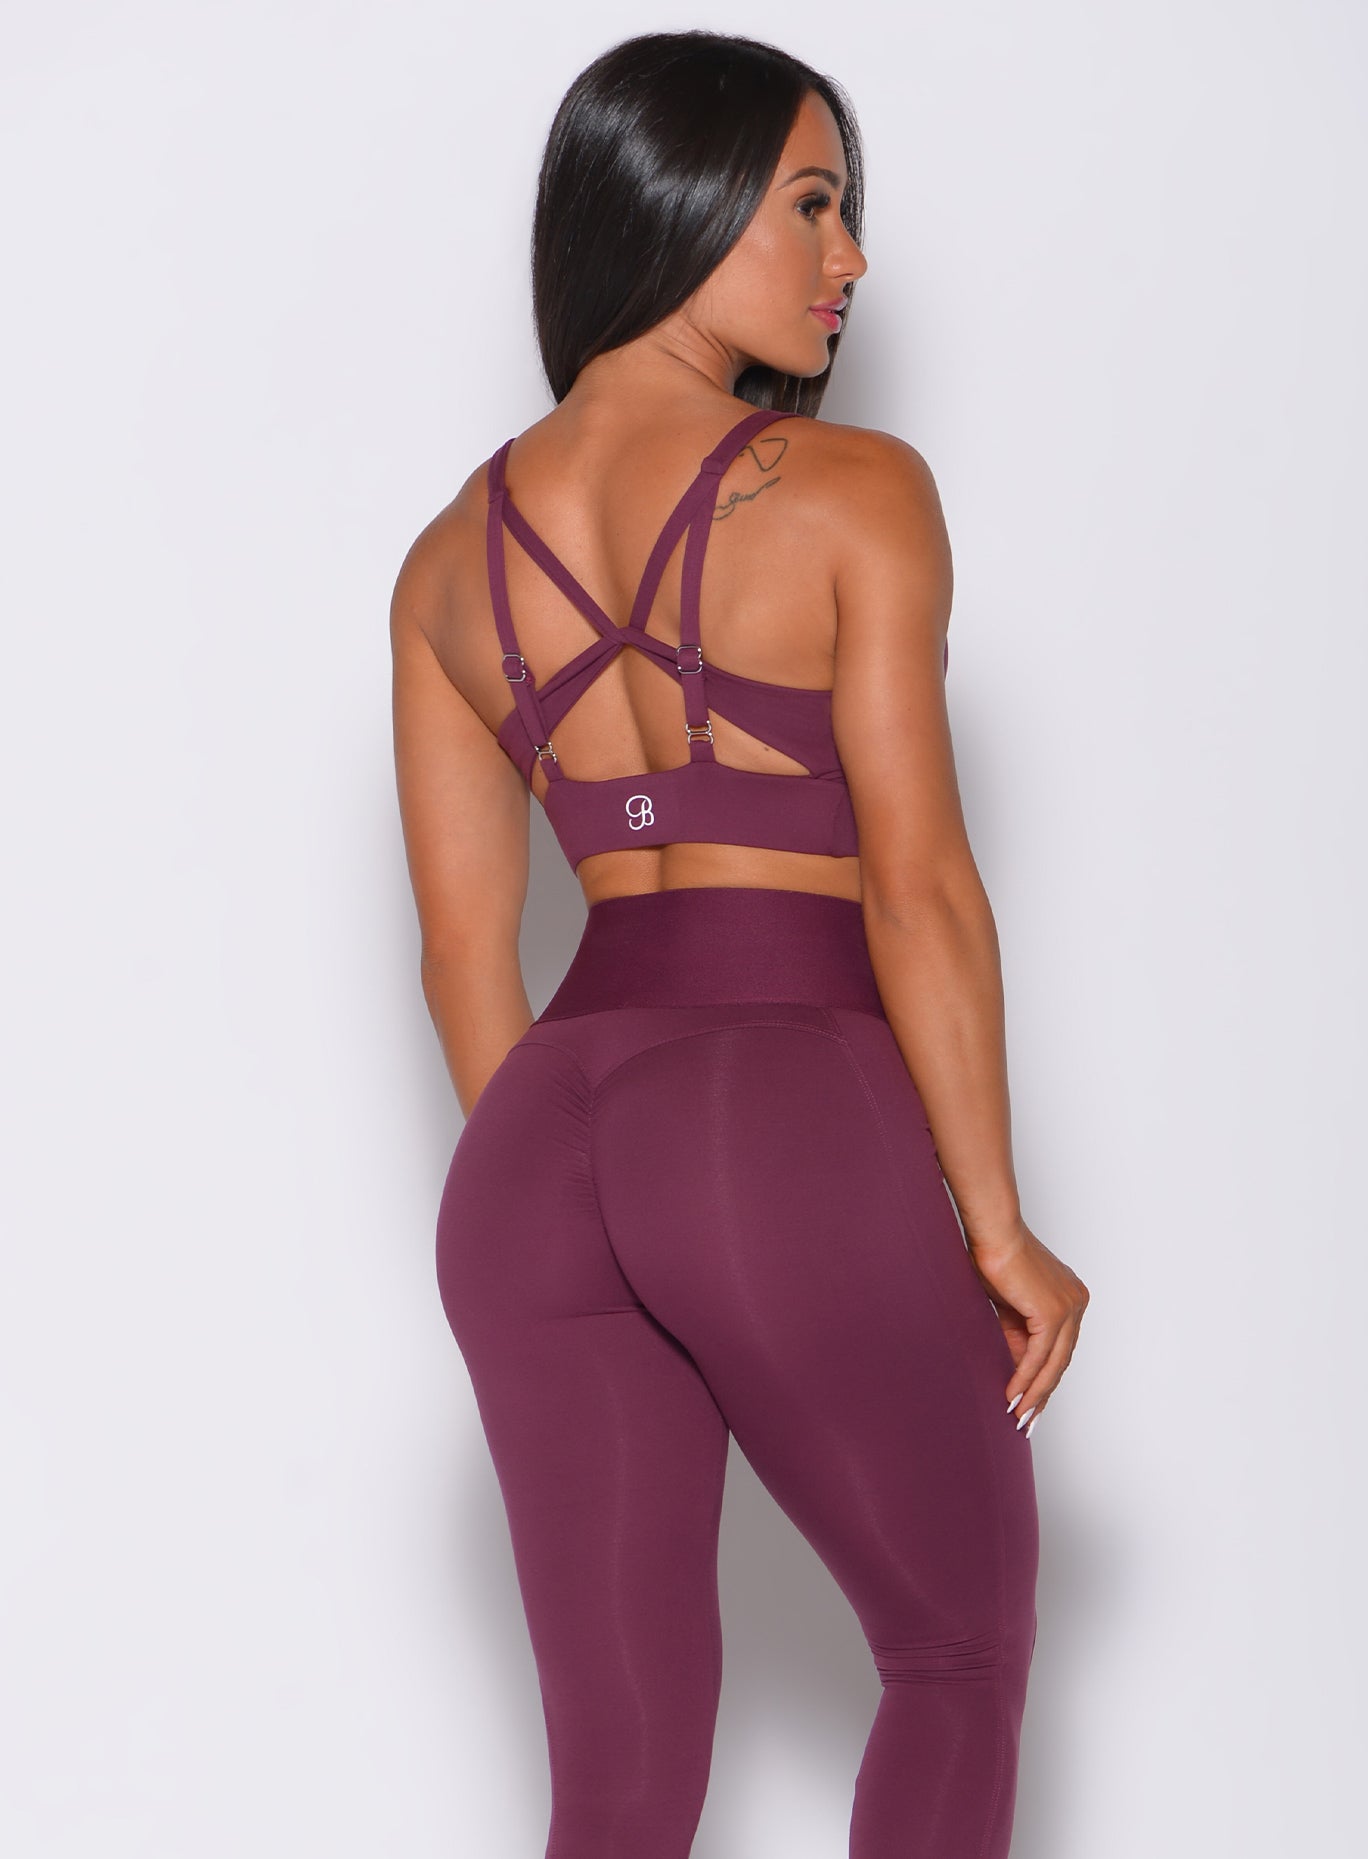 Back profile view of a model in our impact sports bra in majestic purple color and a matching high waist leggings